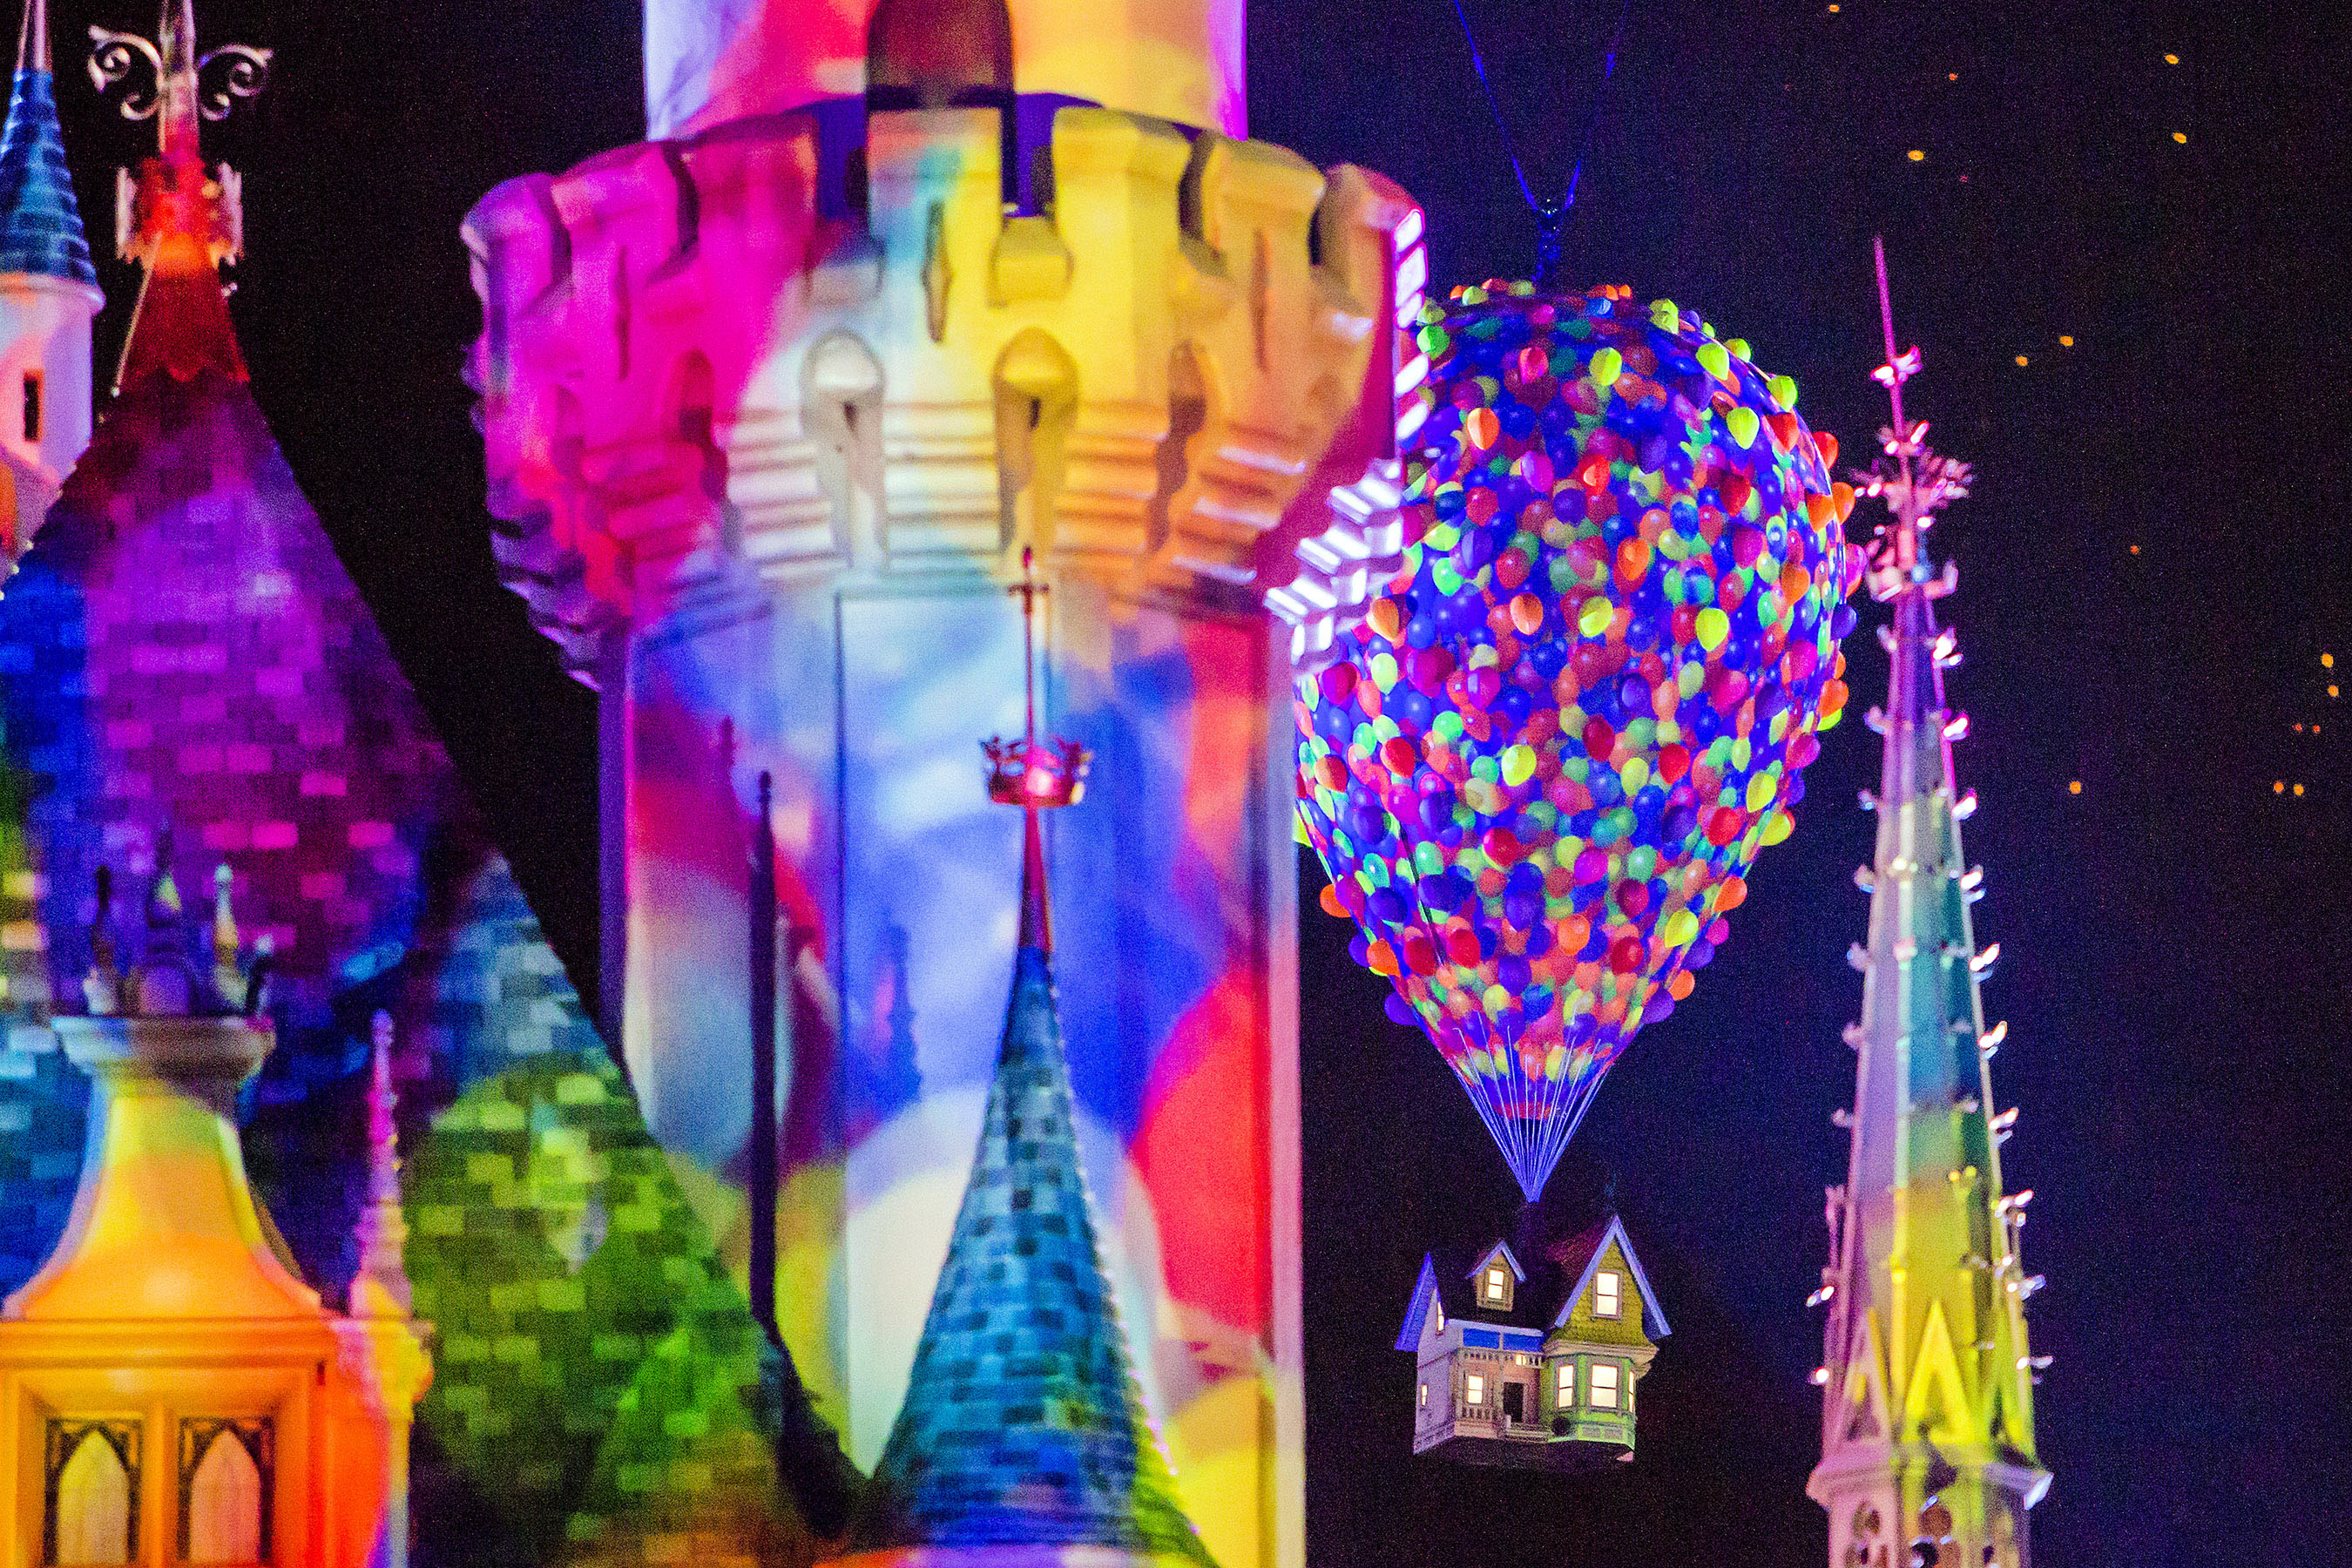 Take a First Look at ‘Together Forever- A Pixar Nighttime Spectacular’ Before it Comes to Disneyland Park April 13